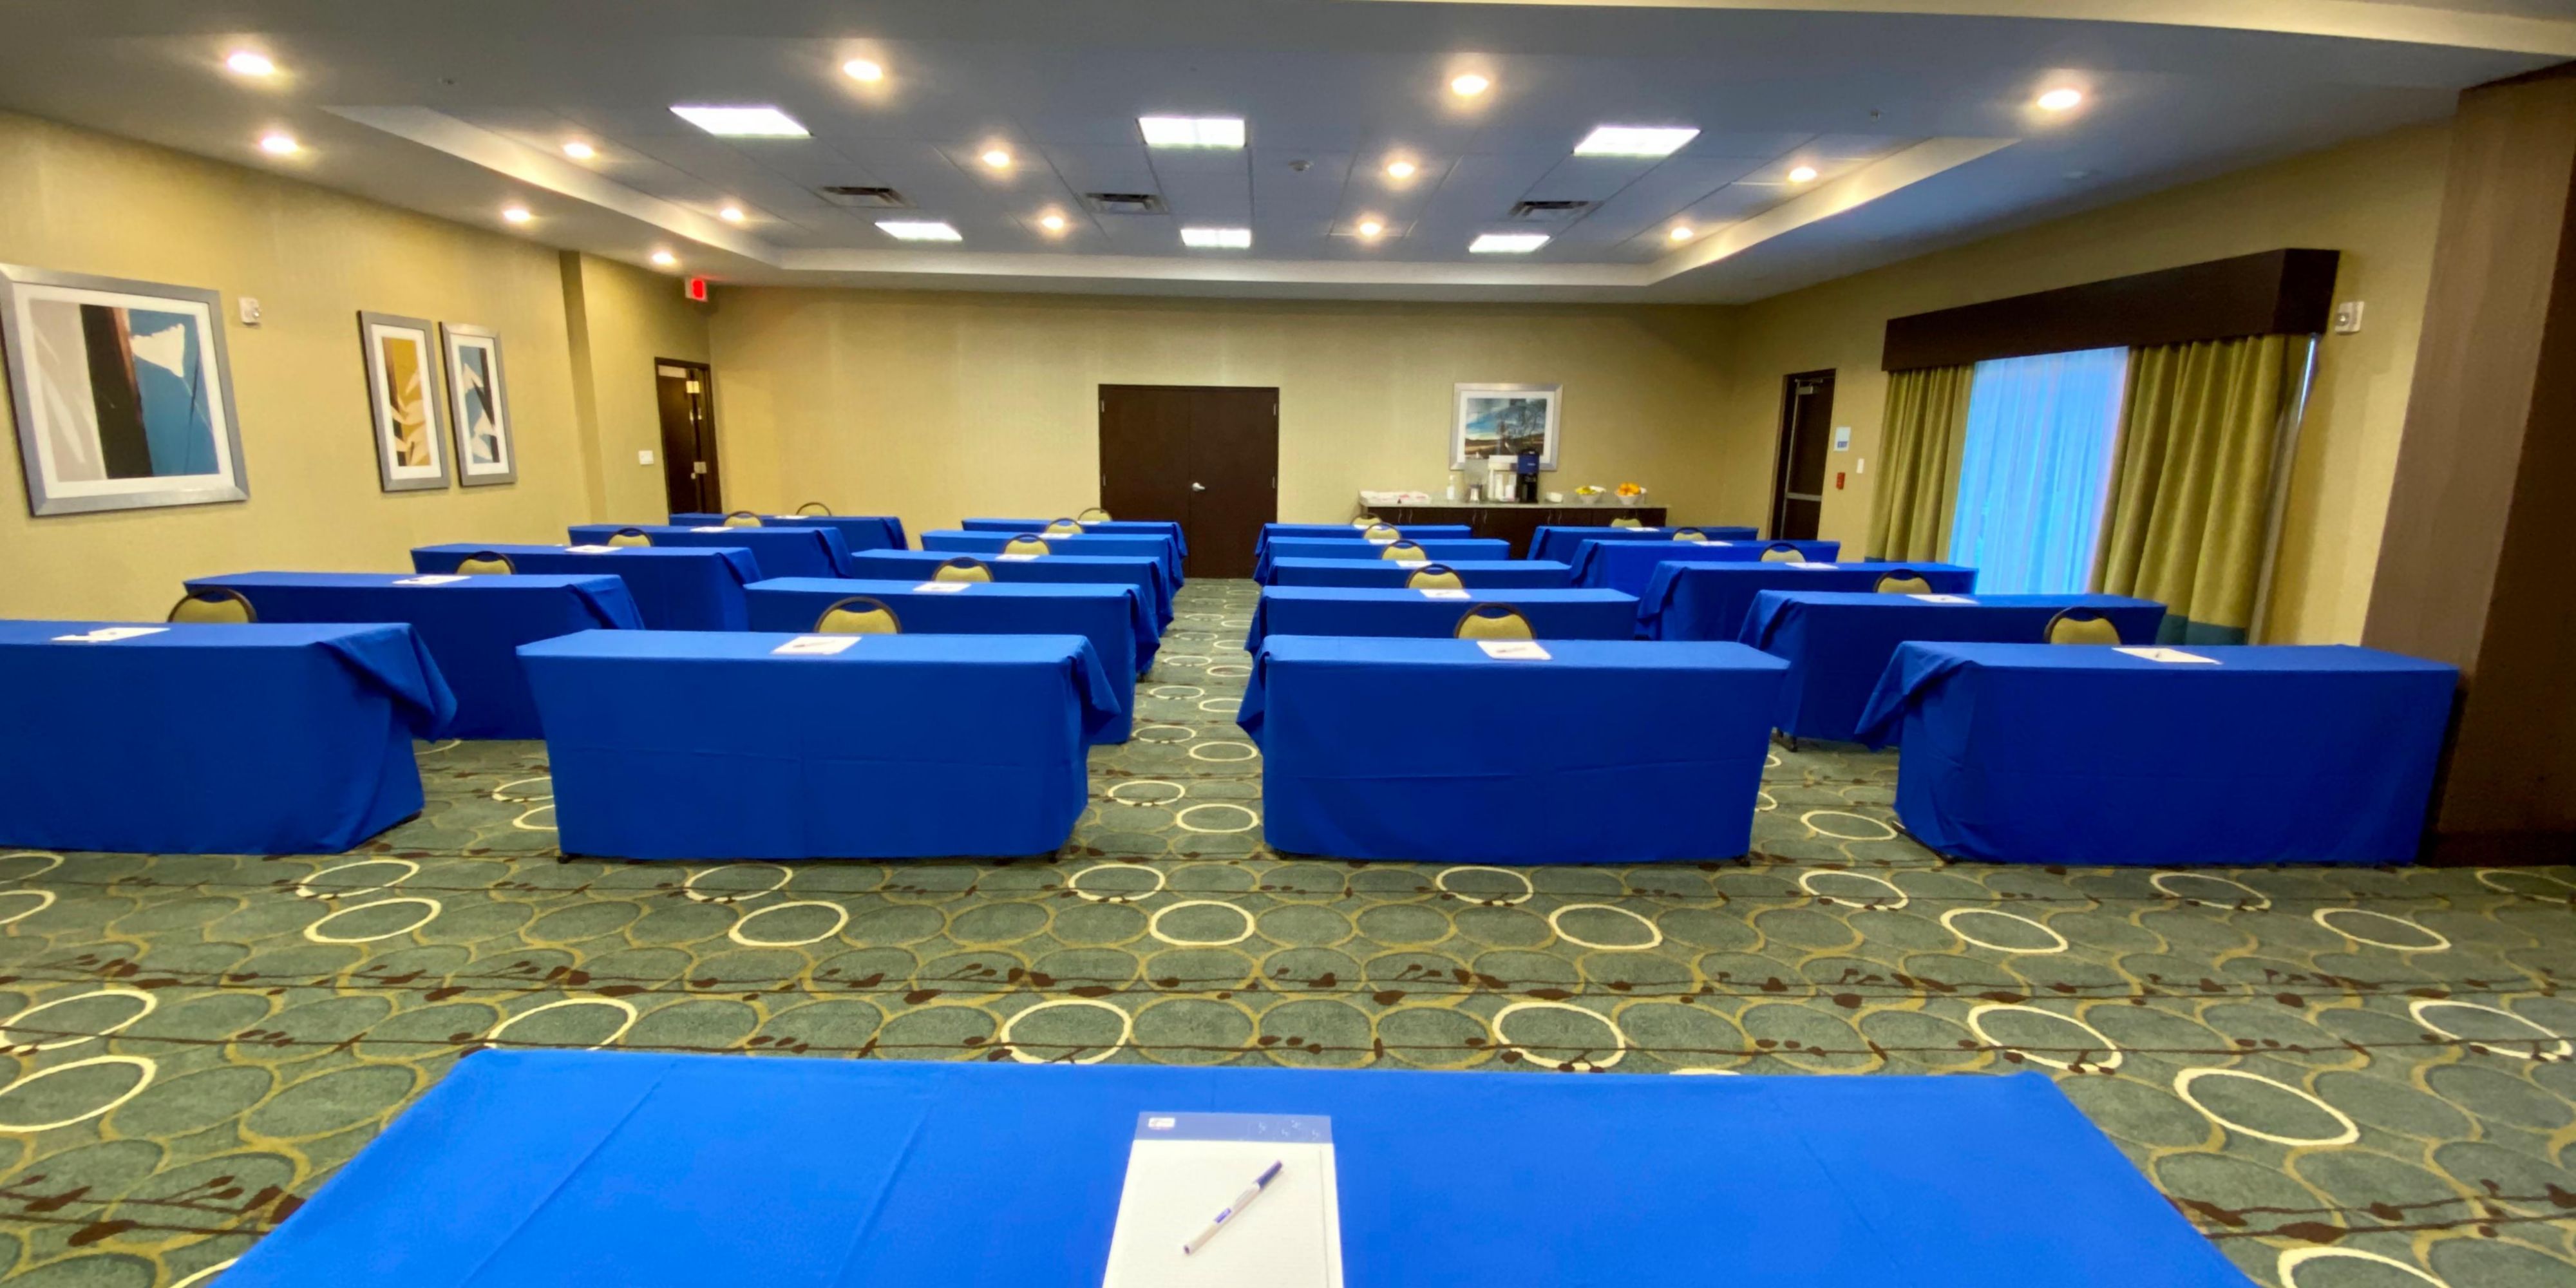 We are delighted to offer a wide variety of options for your next meeting or event. Our 1400 square feet meeting space can accommodate up to 120 guests.  